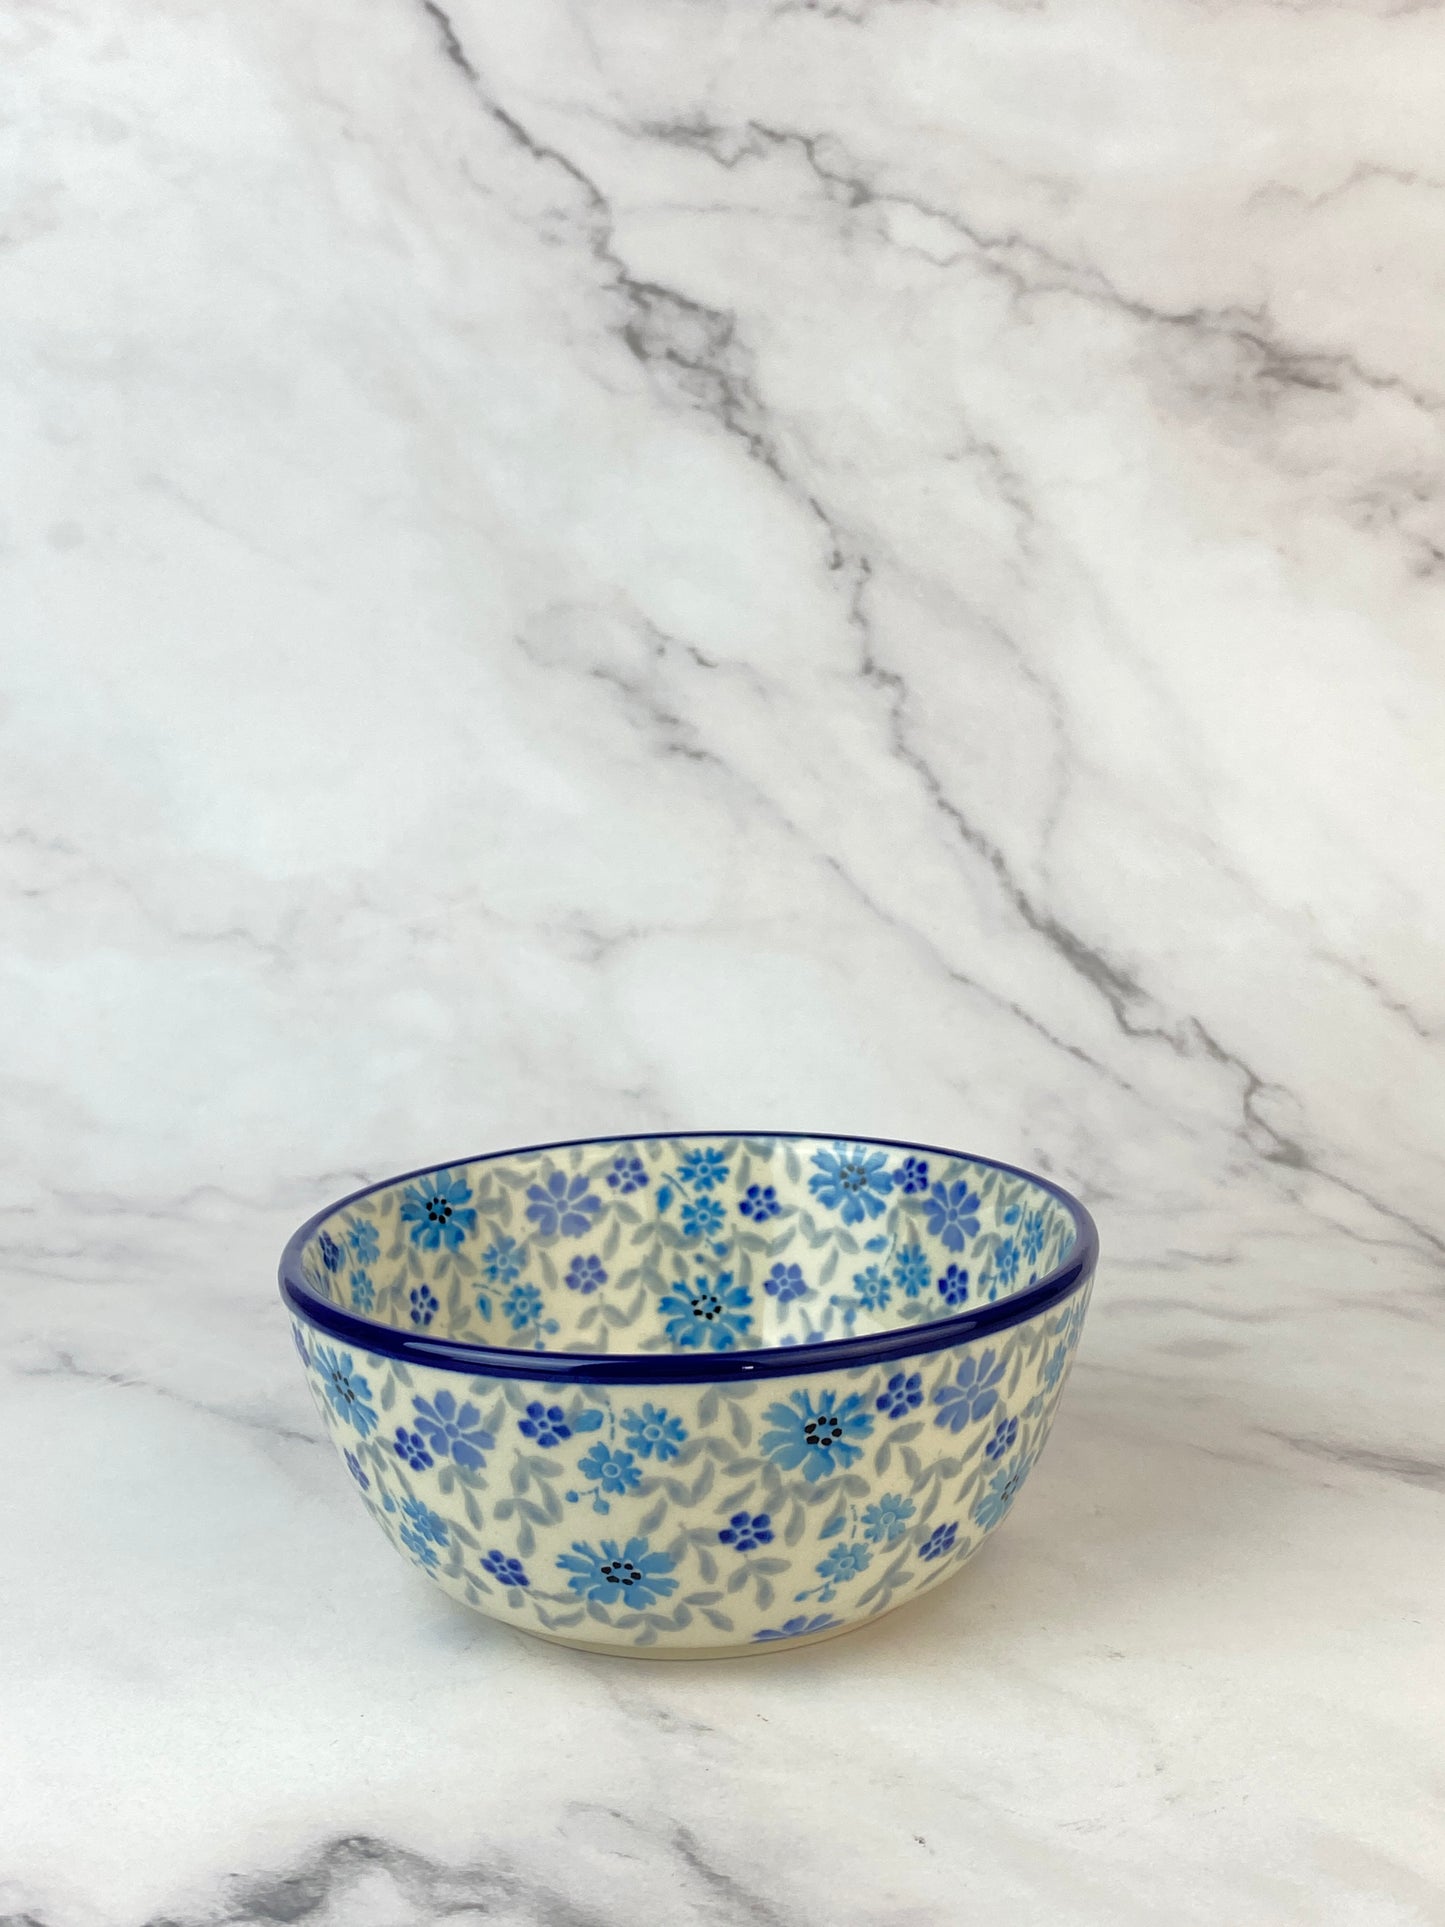 Small Cereal / Dessert Bowl - Shape 17 - Pattern 2821